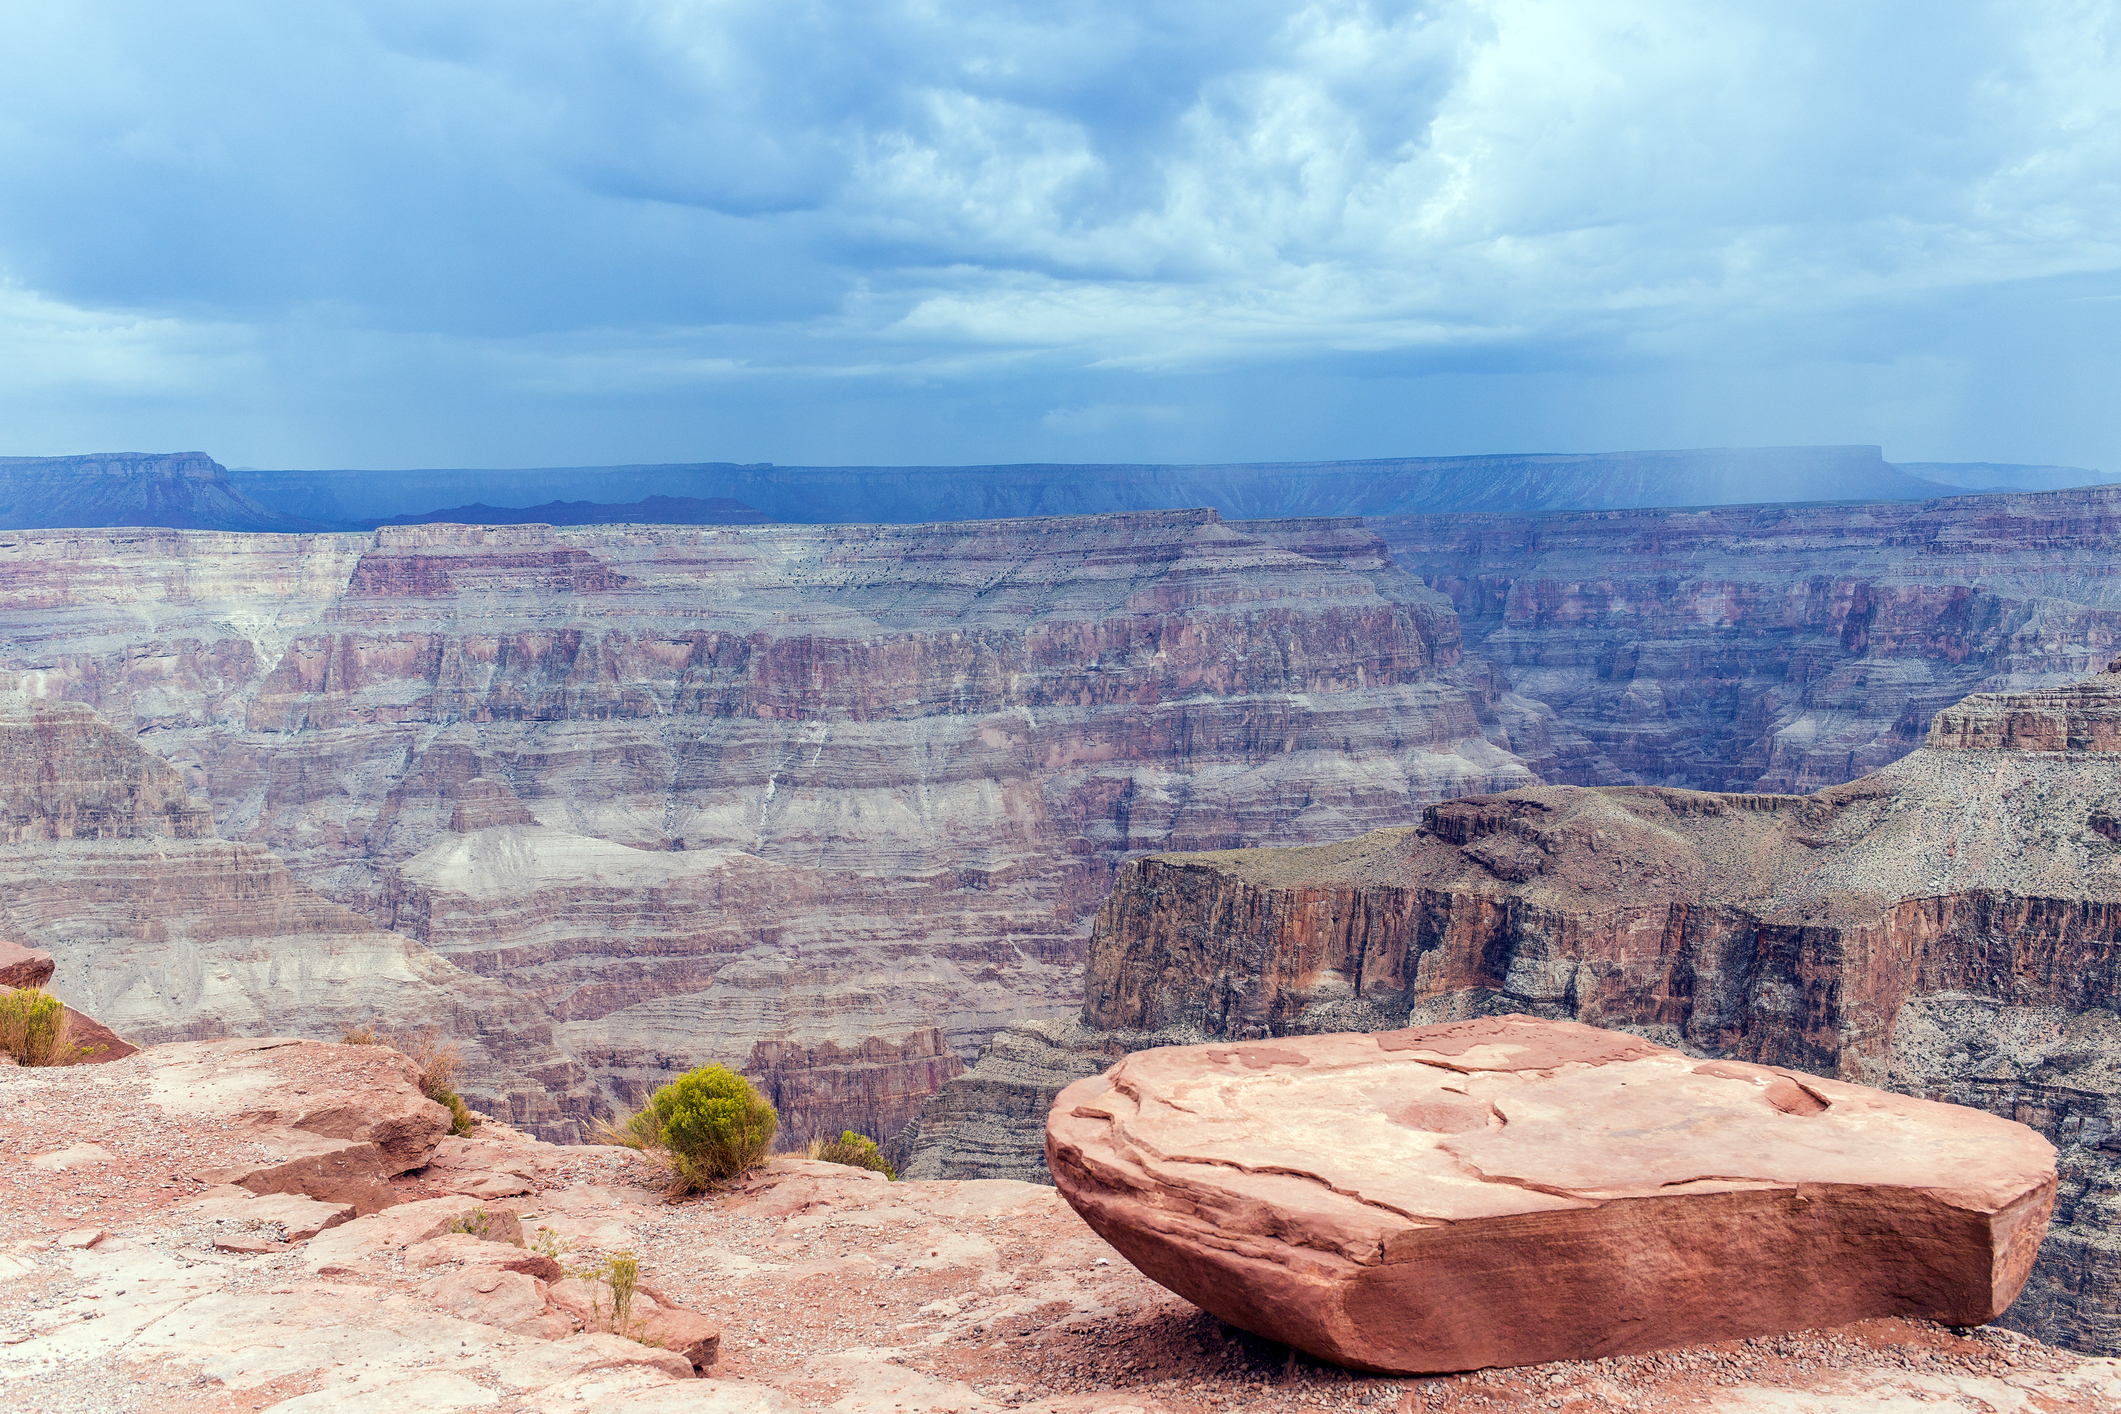 The image shows a breathtaking view of the Grand Canyon with layered rock formations and a large, flat rock in the foreground. No people are present